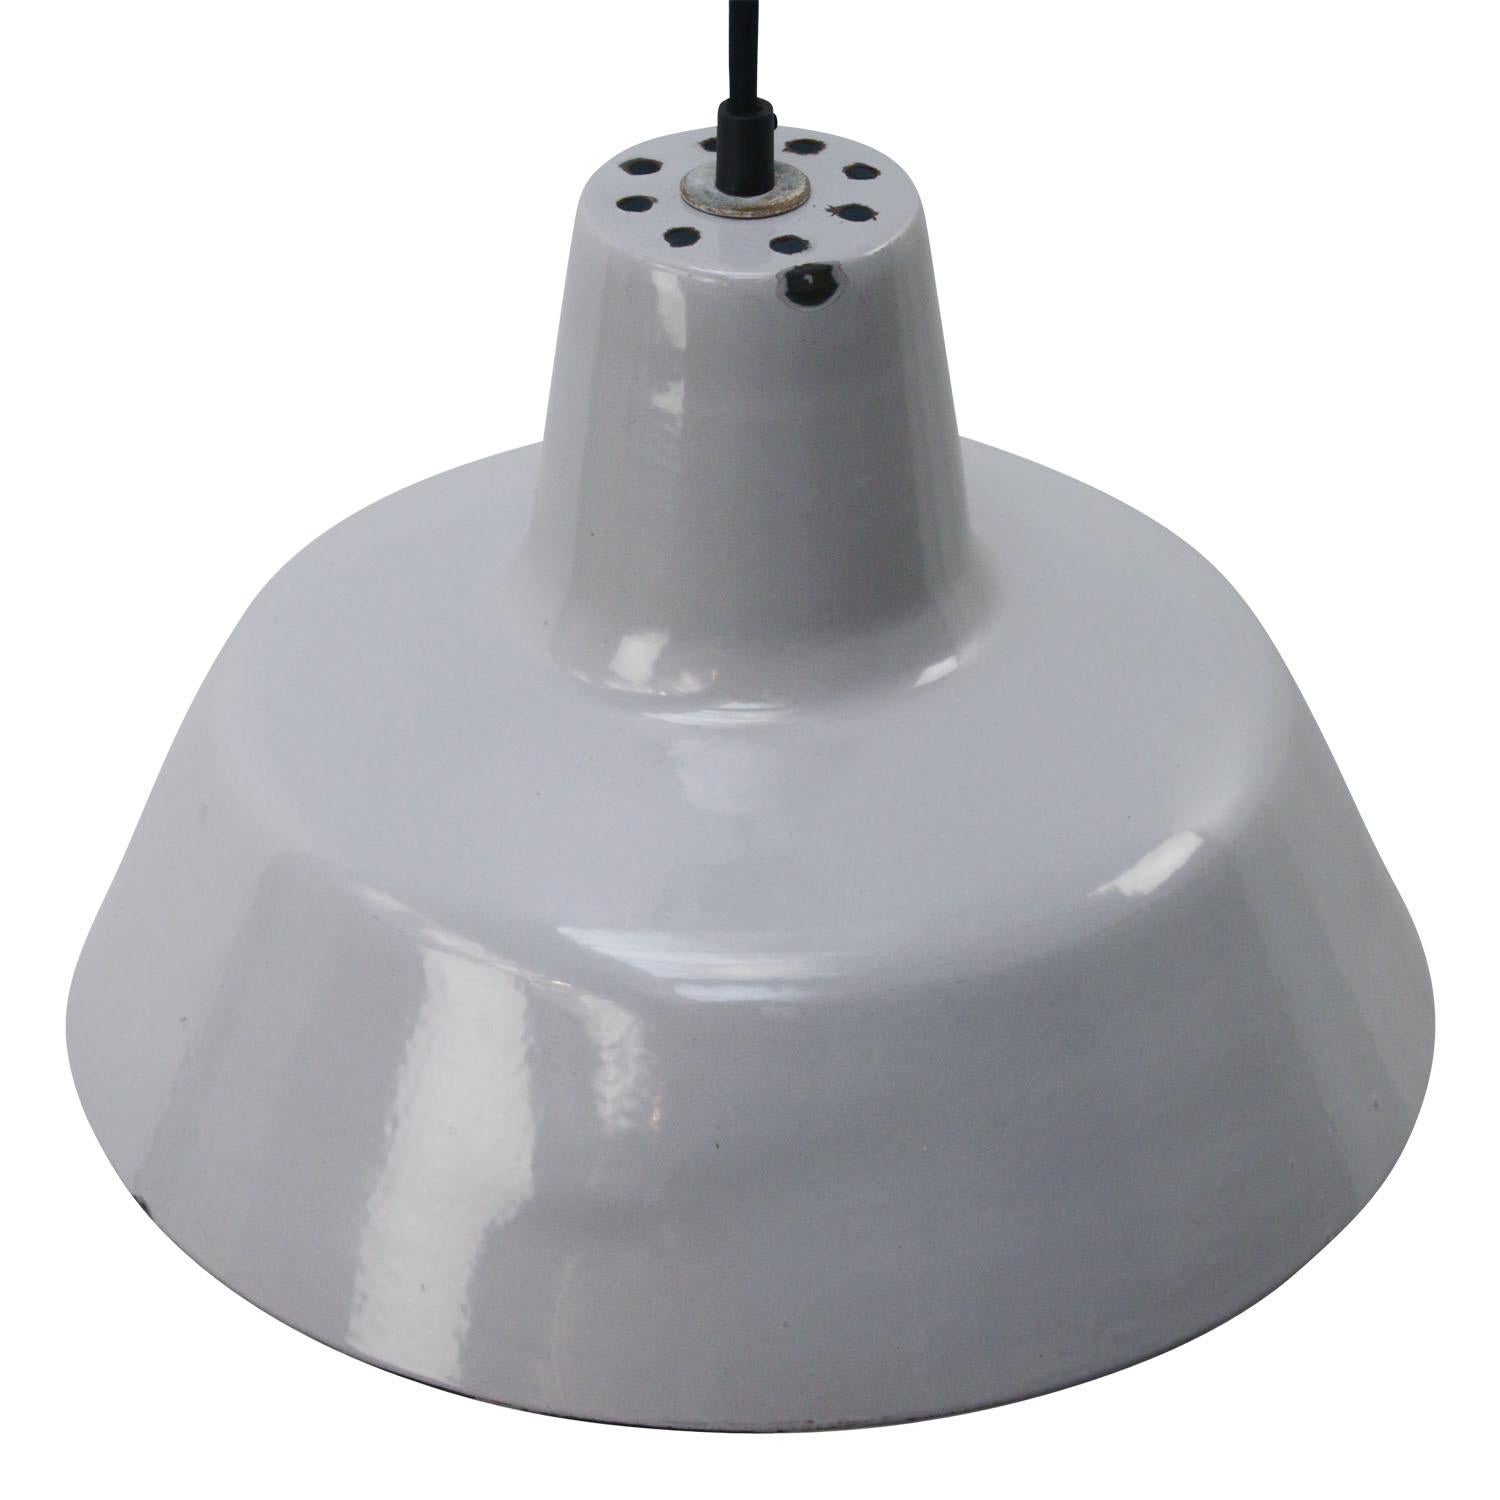 Dutch industrial hanging lamp by Philips
grey enamel white interior

Weight: 1.50 kg / 3.3 lb

Priced per individual item. All lamps have been made suitable by international standards for incandescent light bulbs, energy-efficient and LED